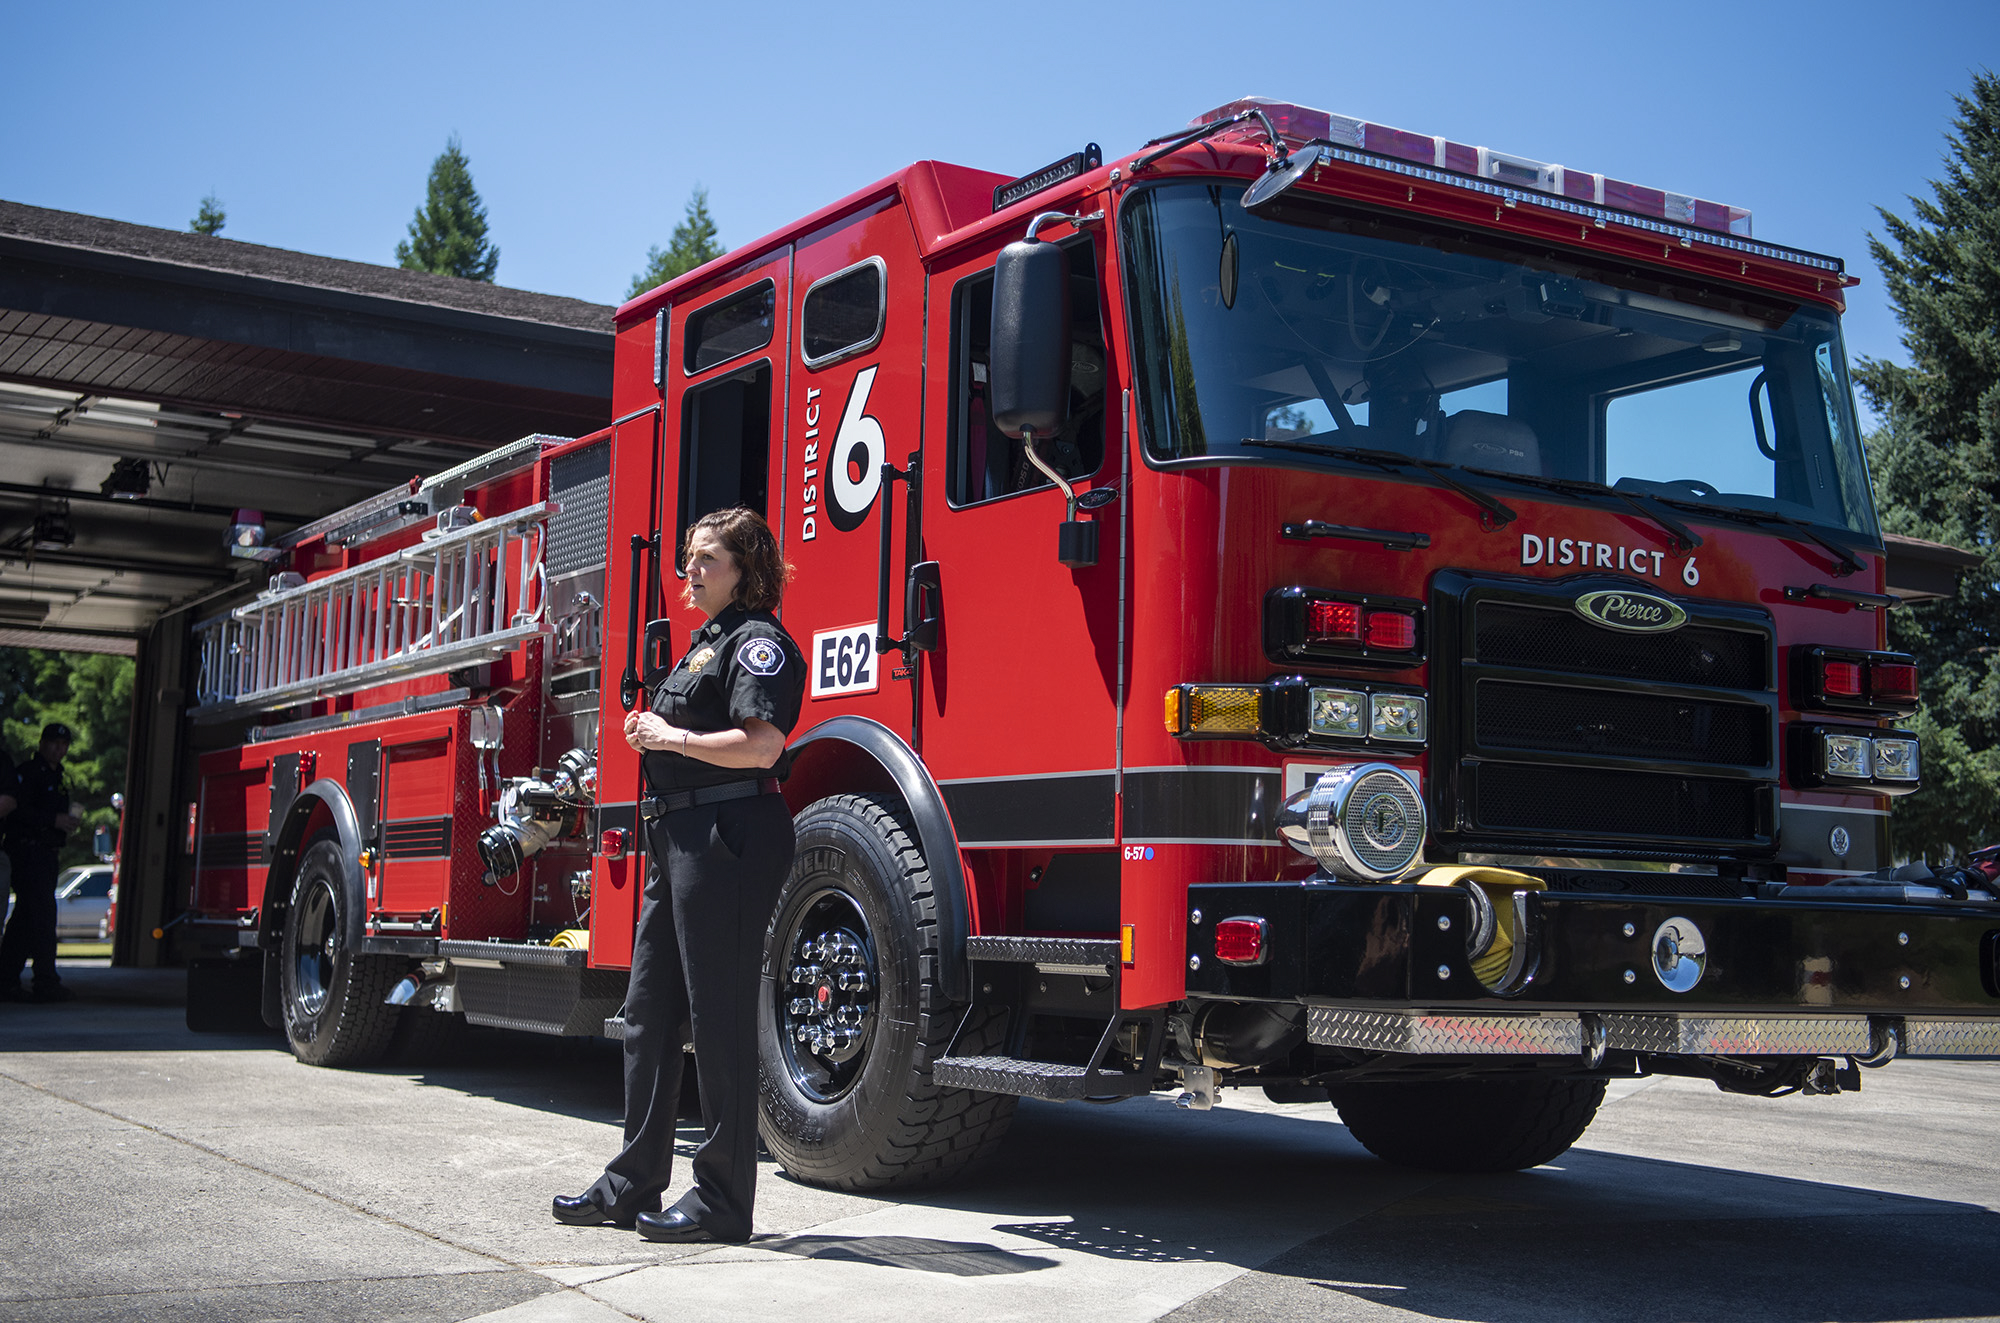 A former Clark County Fire District 6 firefighter has filed a federal lawsuit against the agency alleging a hostile work environment and racial discrimination. The suit names Fire Chief Kristan Maurer, here in July in front of  a new fire engine.